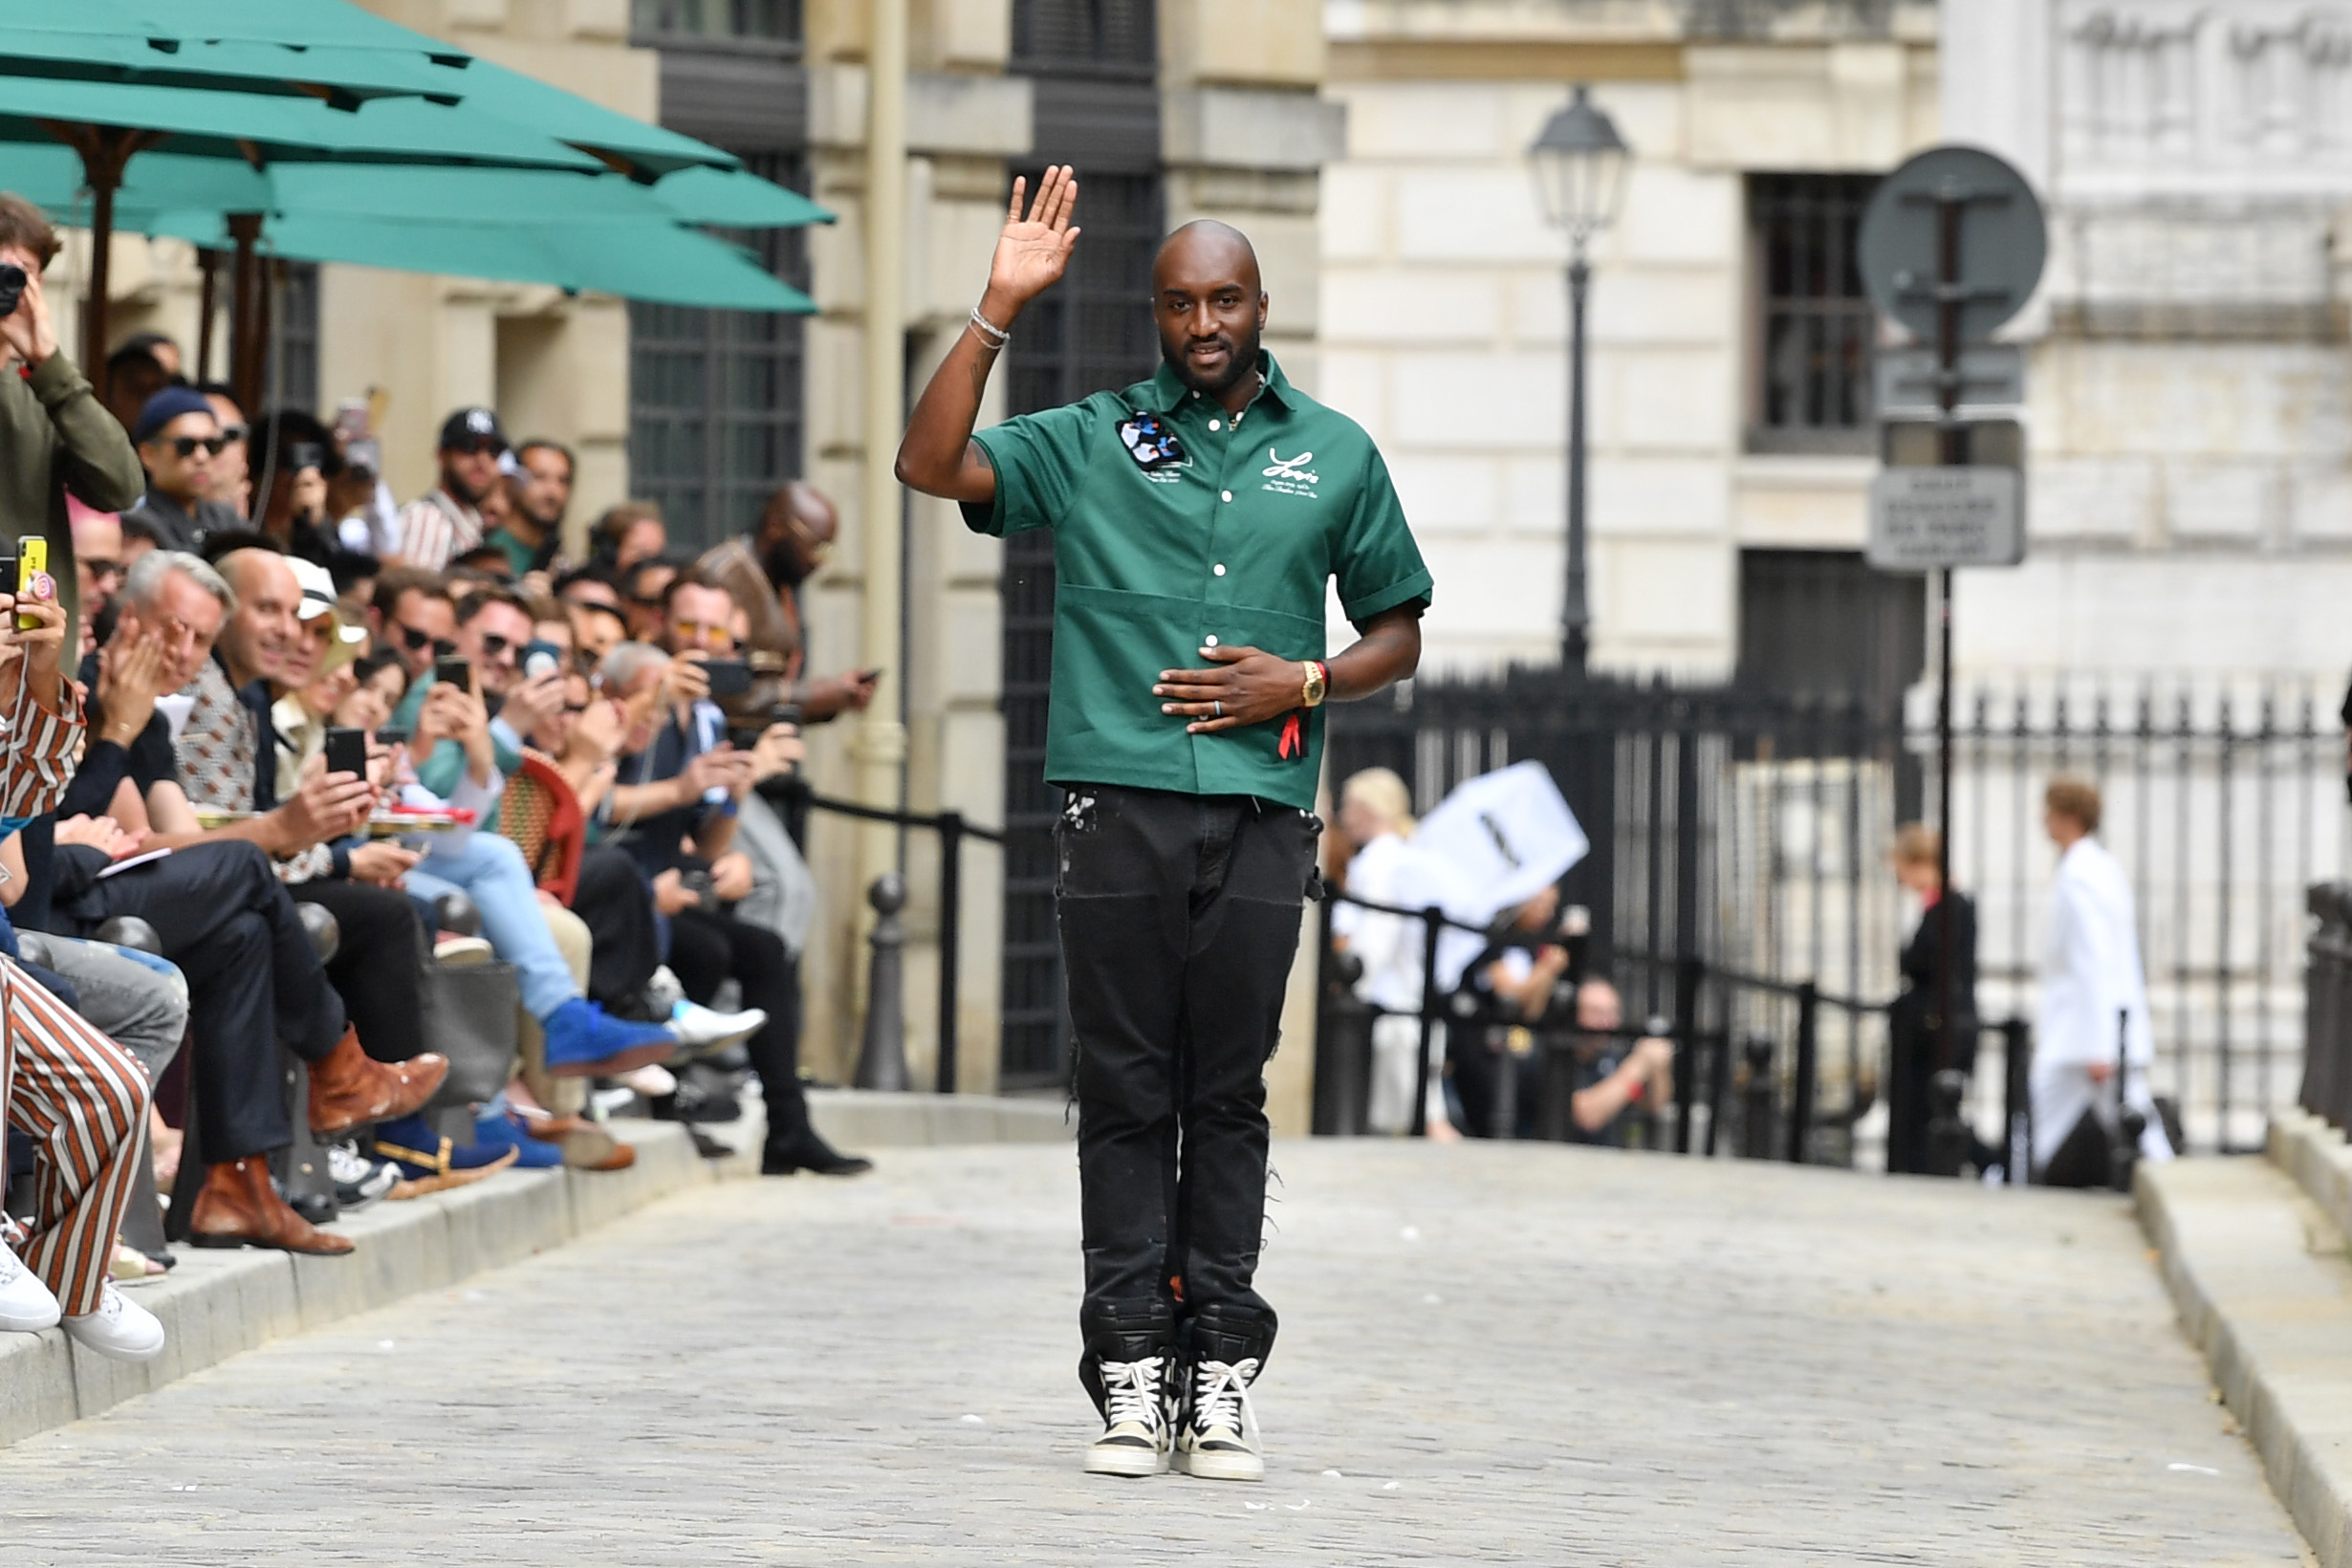 Virgil Abloh is accused of having copied the name Off-White